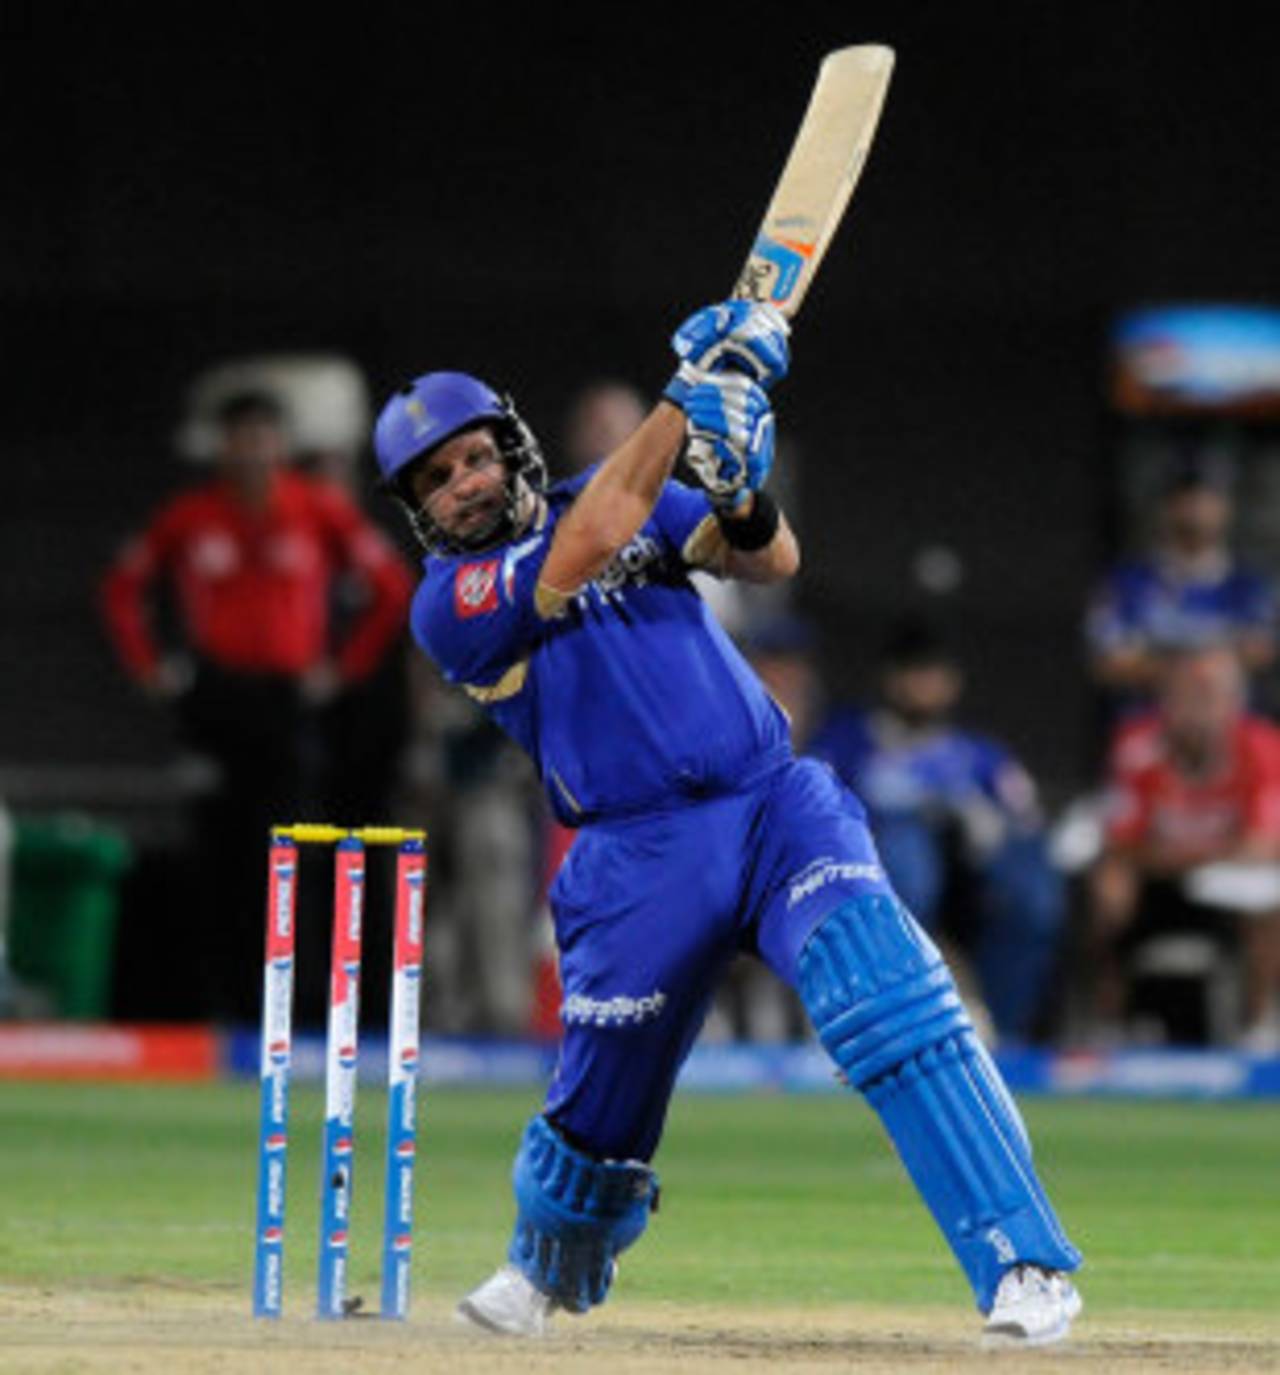 Brad Hodge led Royals to a stirring win but the tournament's backdrop continues to depress&nbsp;&nbsp;&bull;&nbsp;&nbsp;BCCI